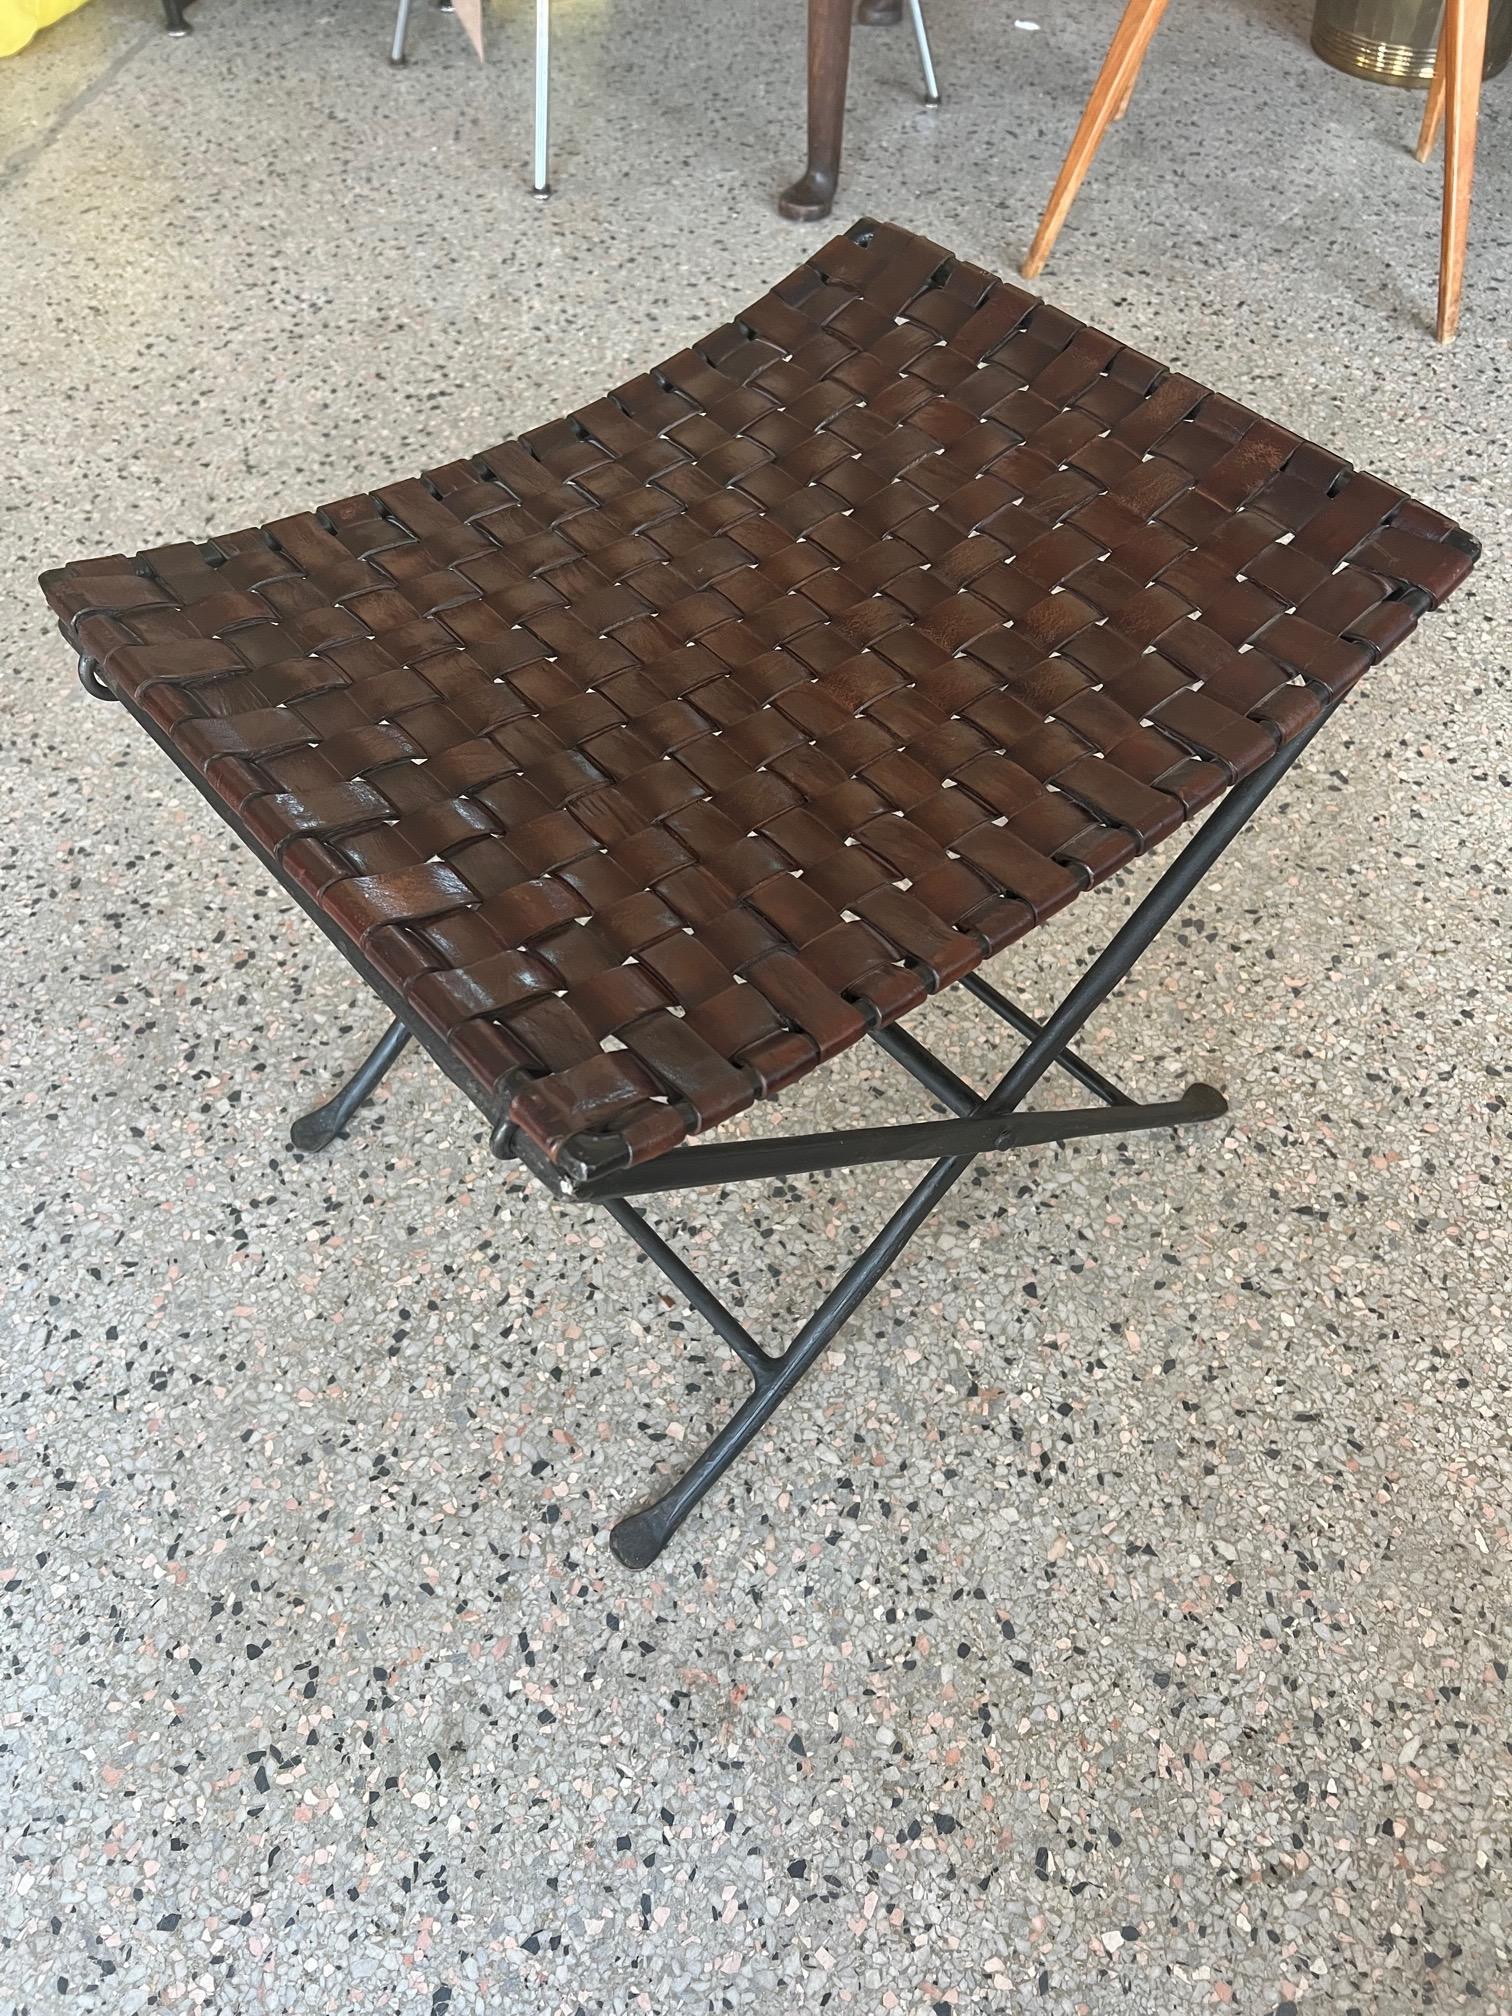 Unusual folding foot stool by William Sheppee. Heavy wrought iron and patinated brown saddle leather.